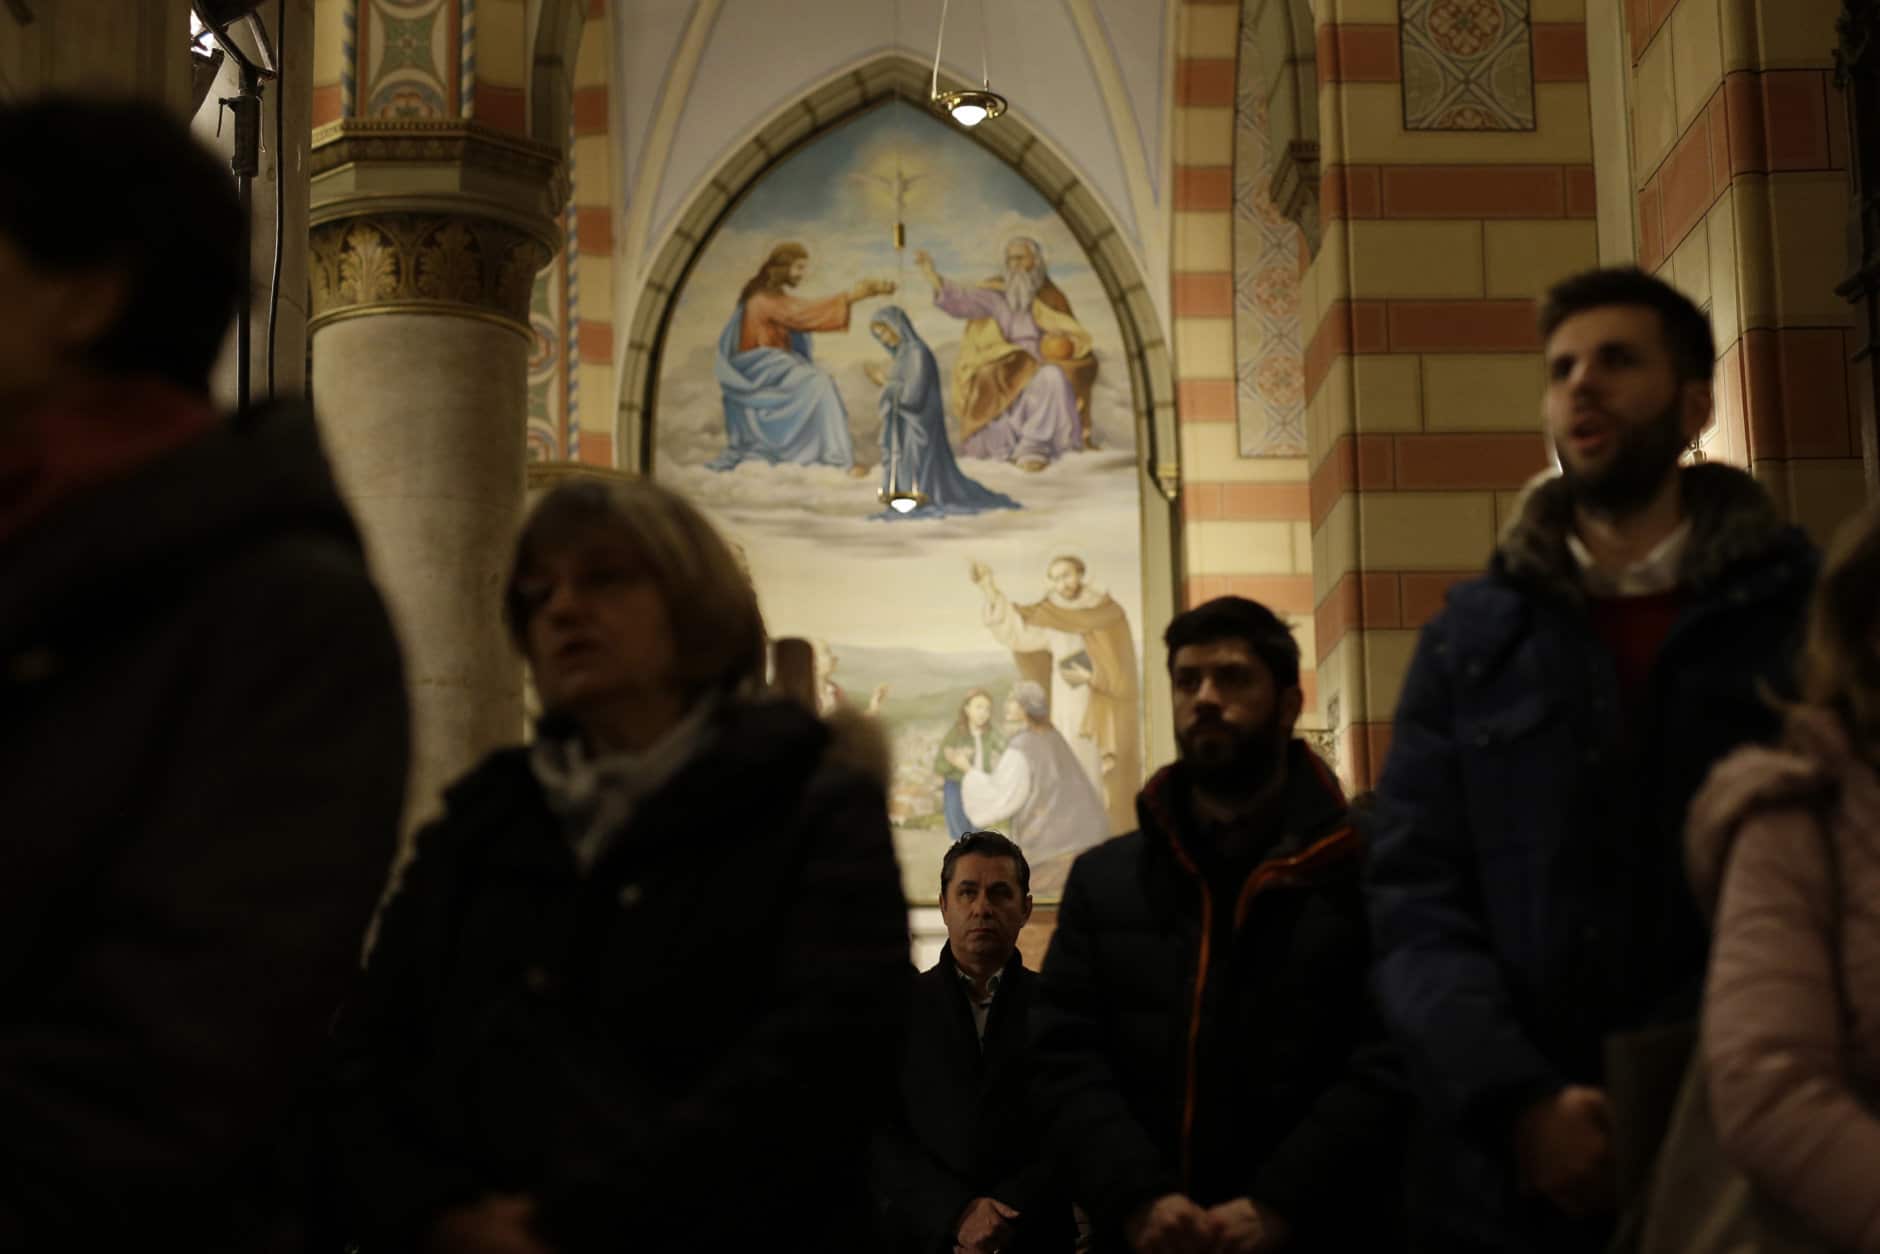 Bosnian people offer a prayer during the Christmas midnight mass in Sarajevo main Cathedral, in Sarajevo, Bosnia, on Tuesday, Dec. 25, 2018. Roman Catholics around the world celebrate Christmas today according to the Gregorian calendar.(AP Photo/Amel Emric)